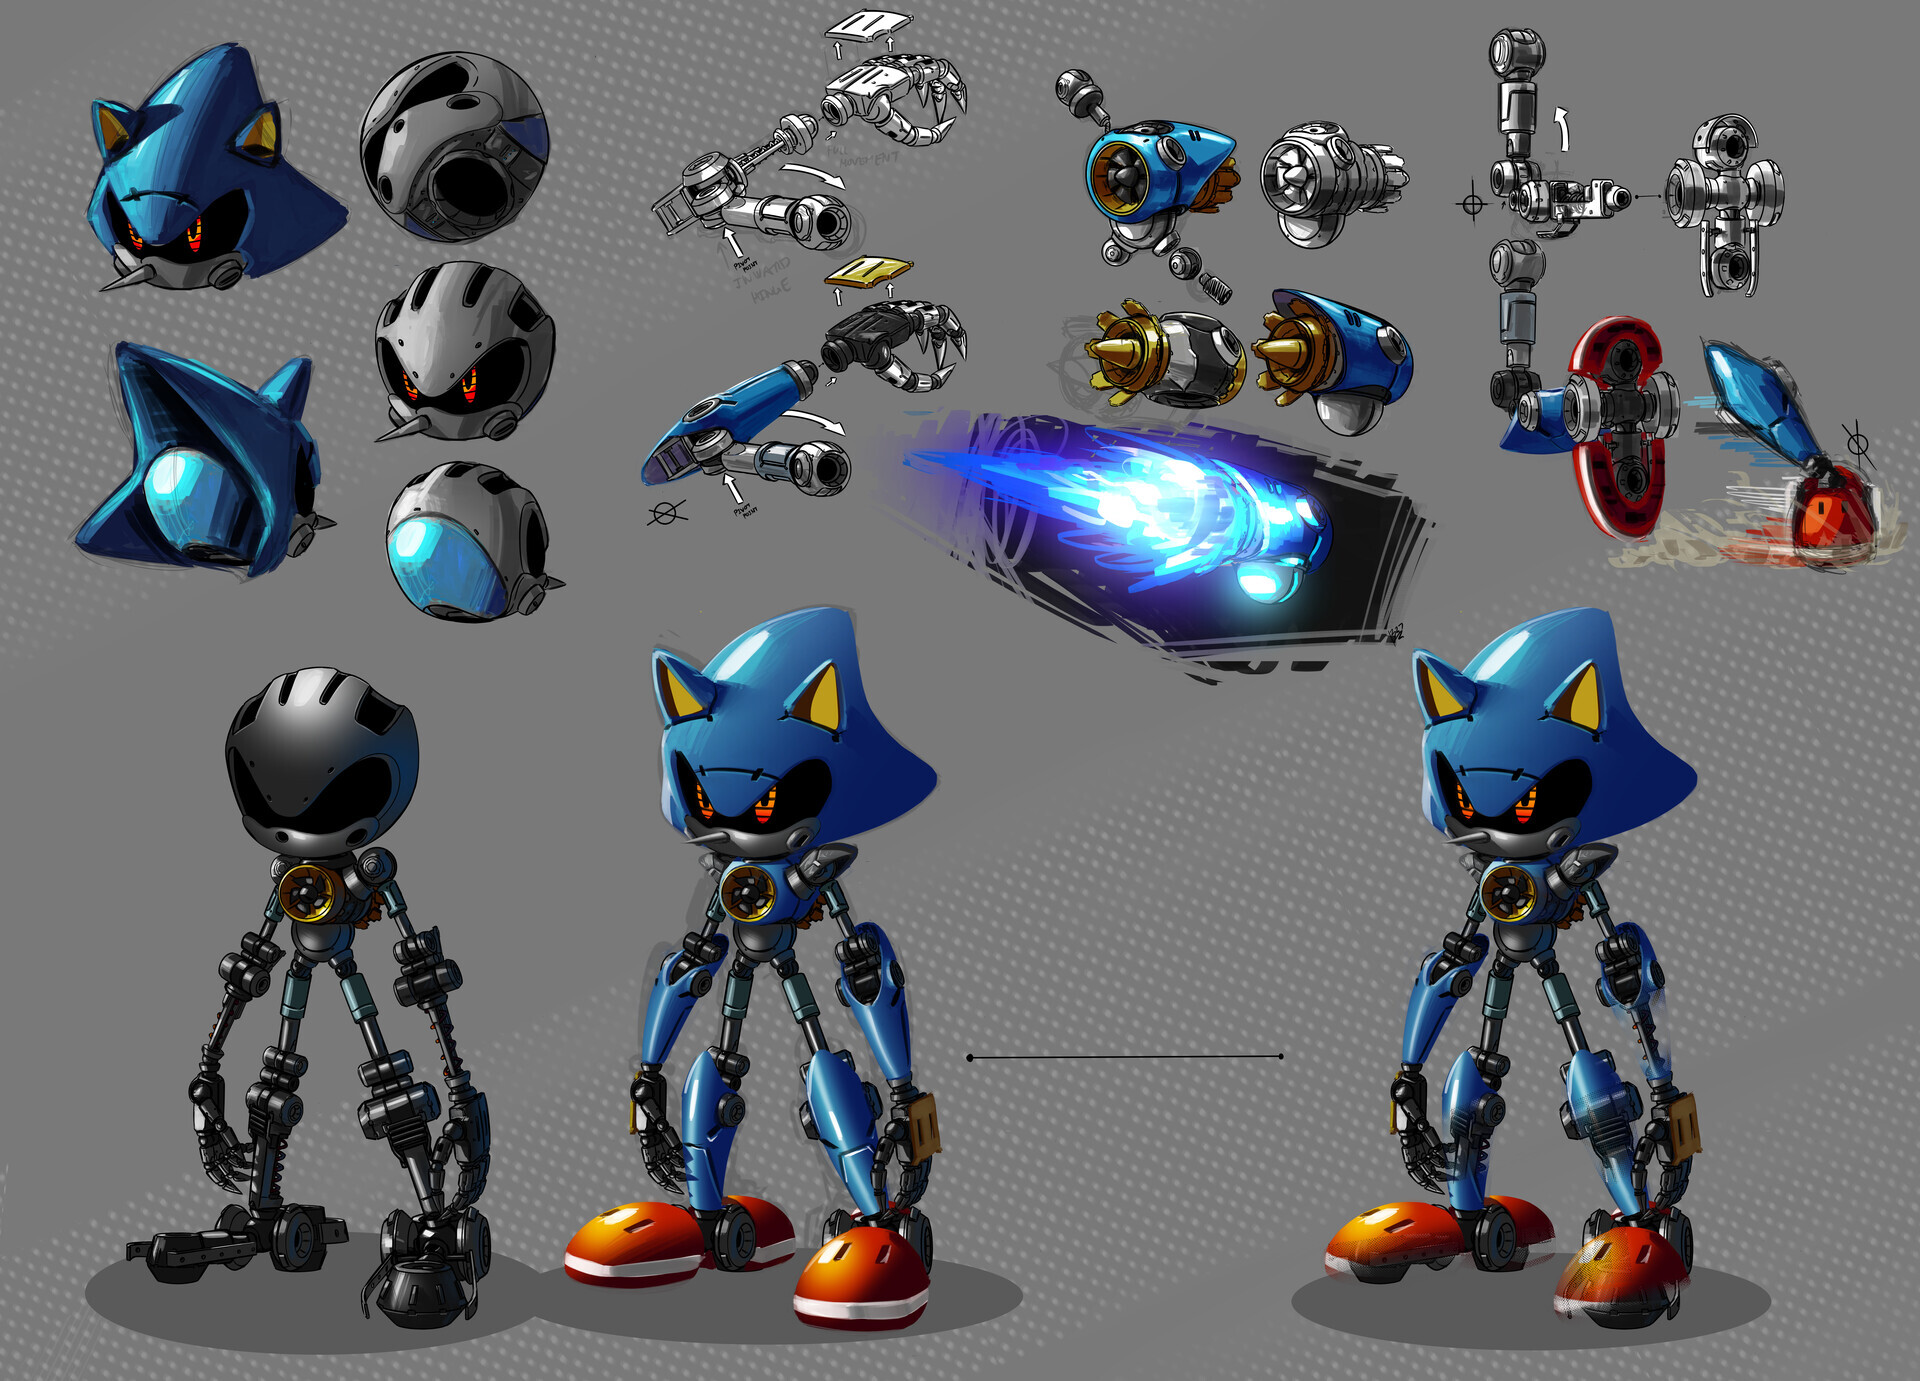 Metal Sonic screenshots, images and pictures - Comic Vine